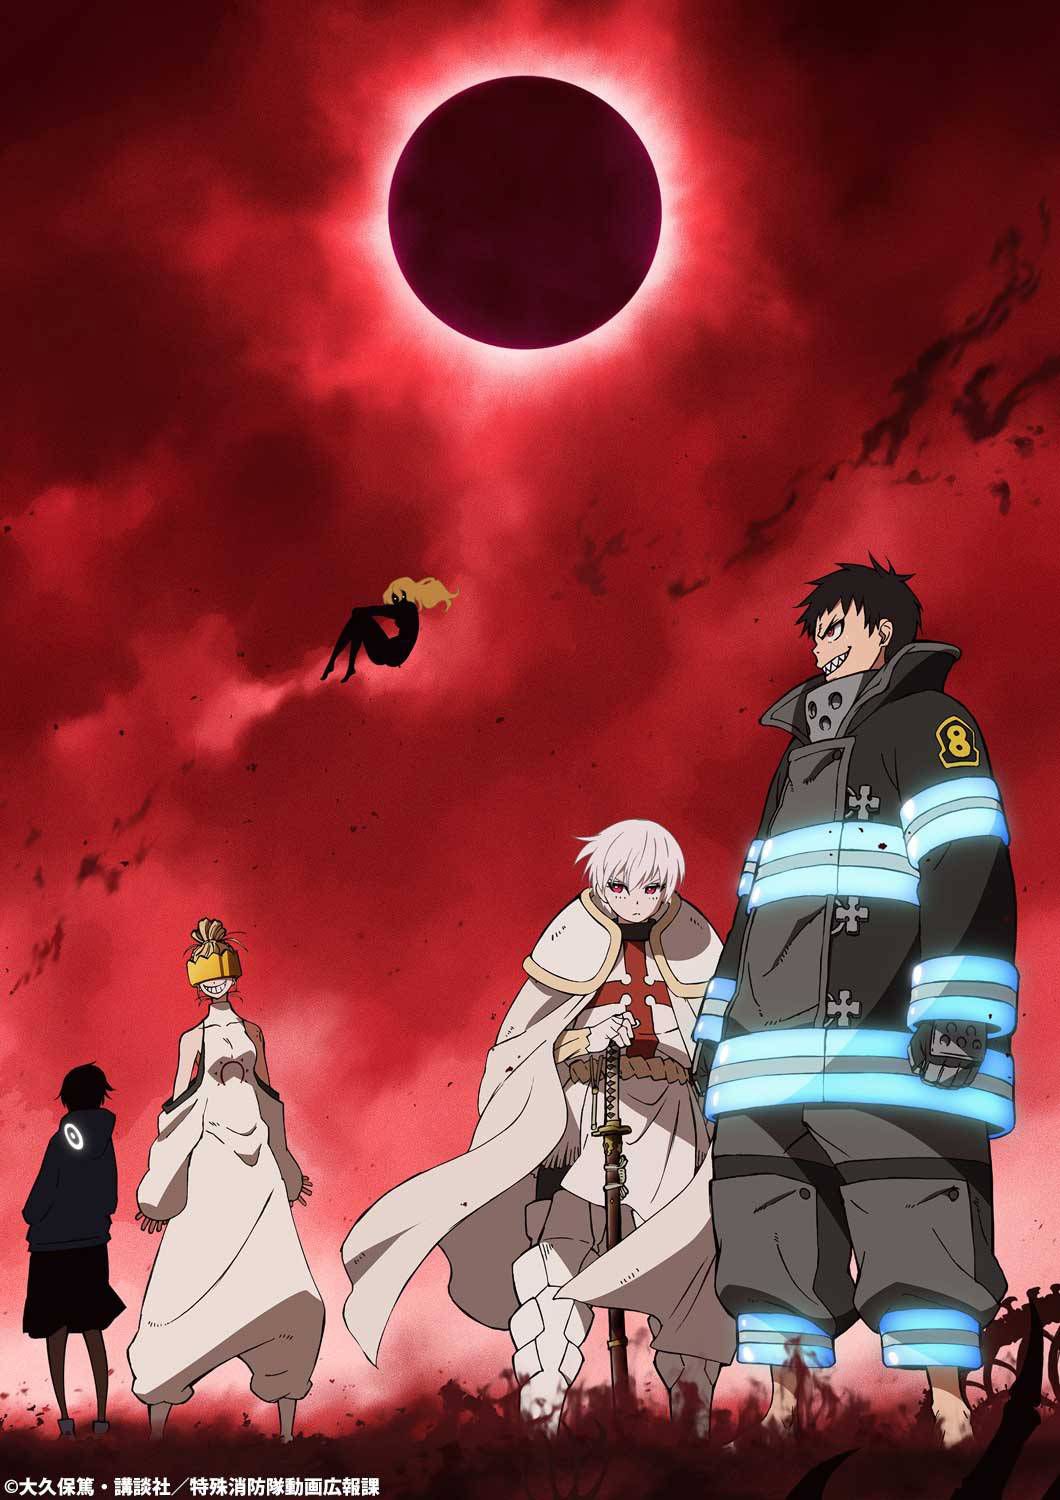 Fire_Force_S2_visual 2